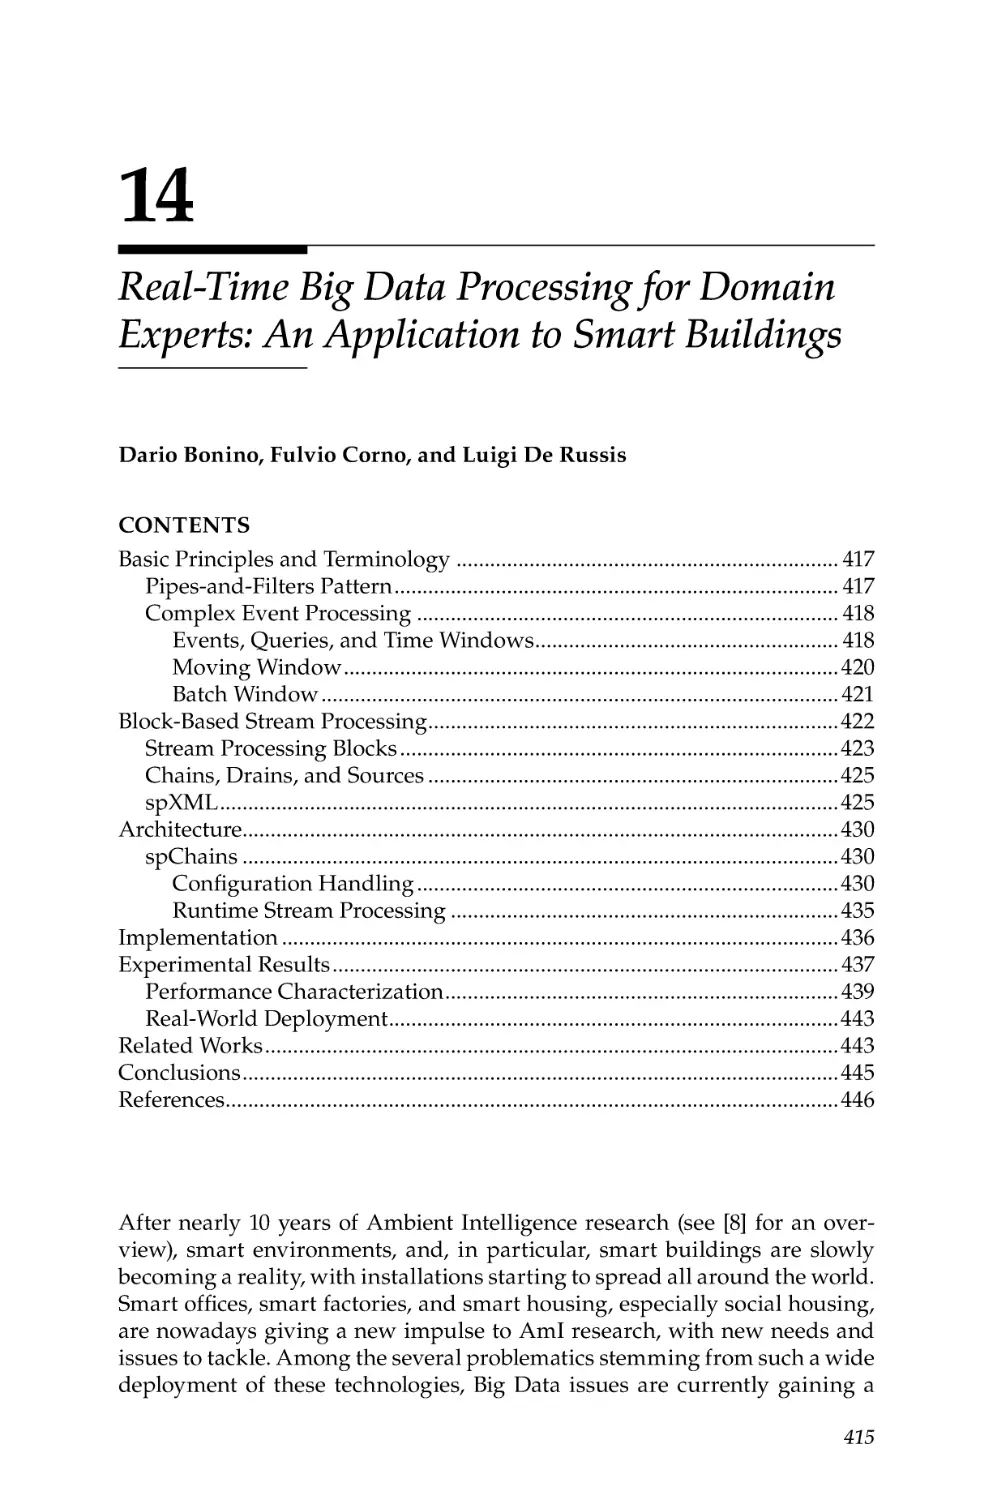 14. Real-Time Big Data Processing for Domain Experts